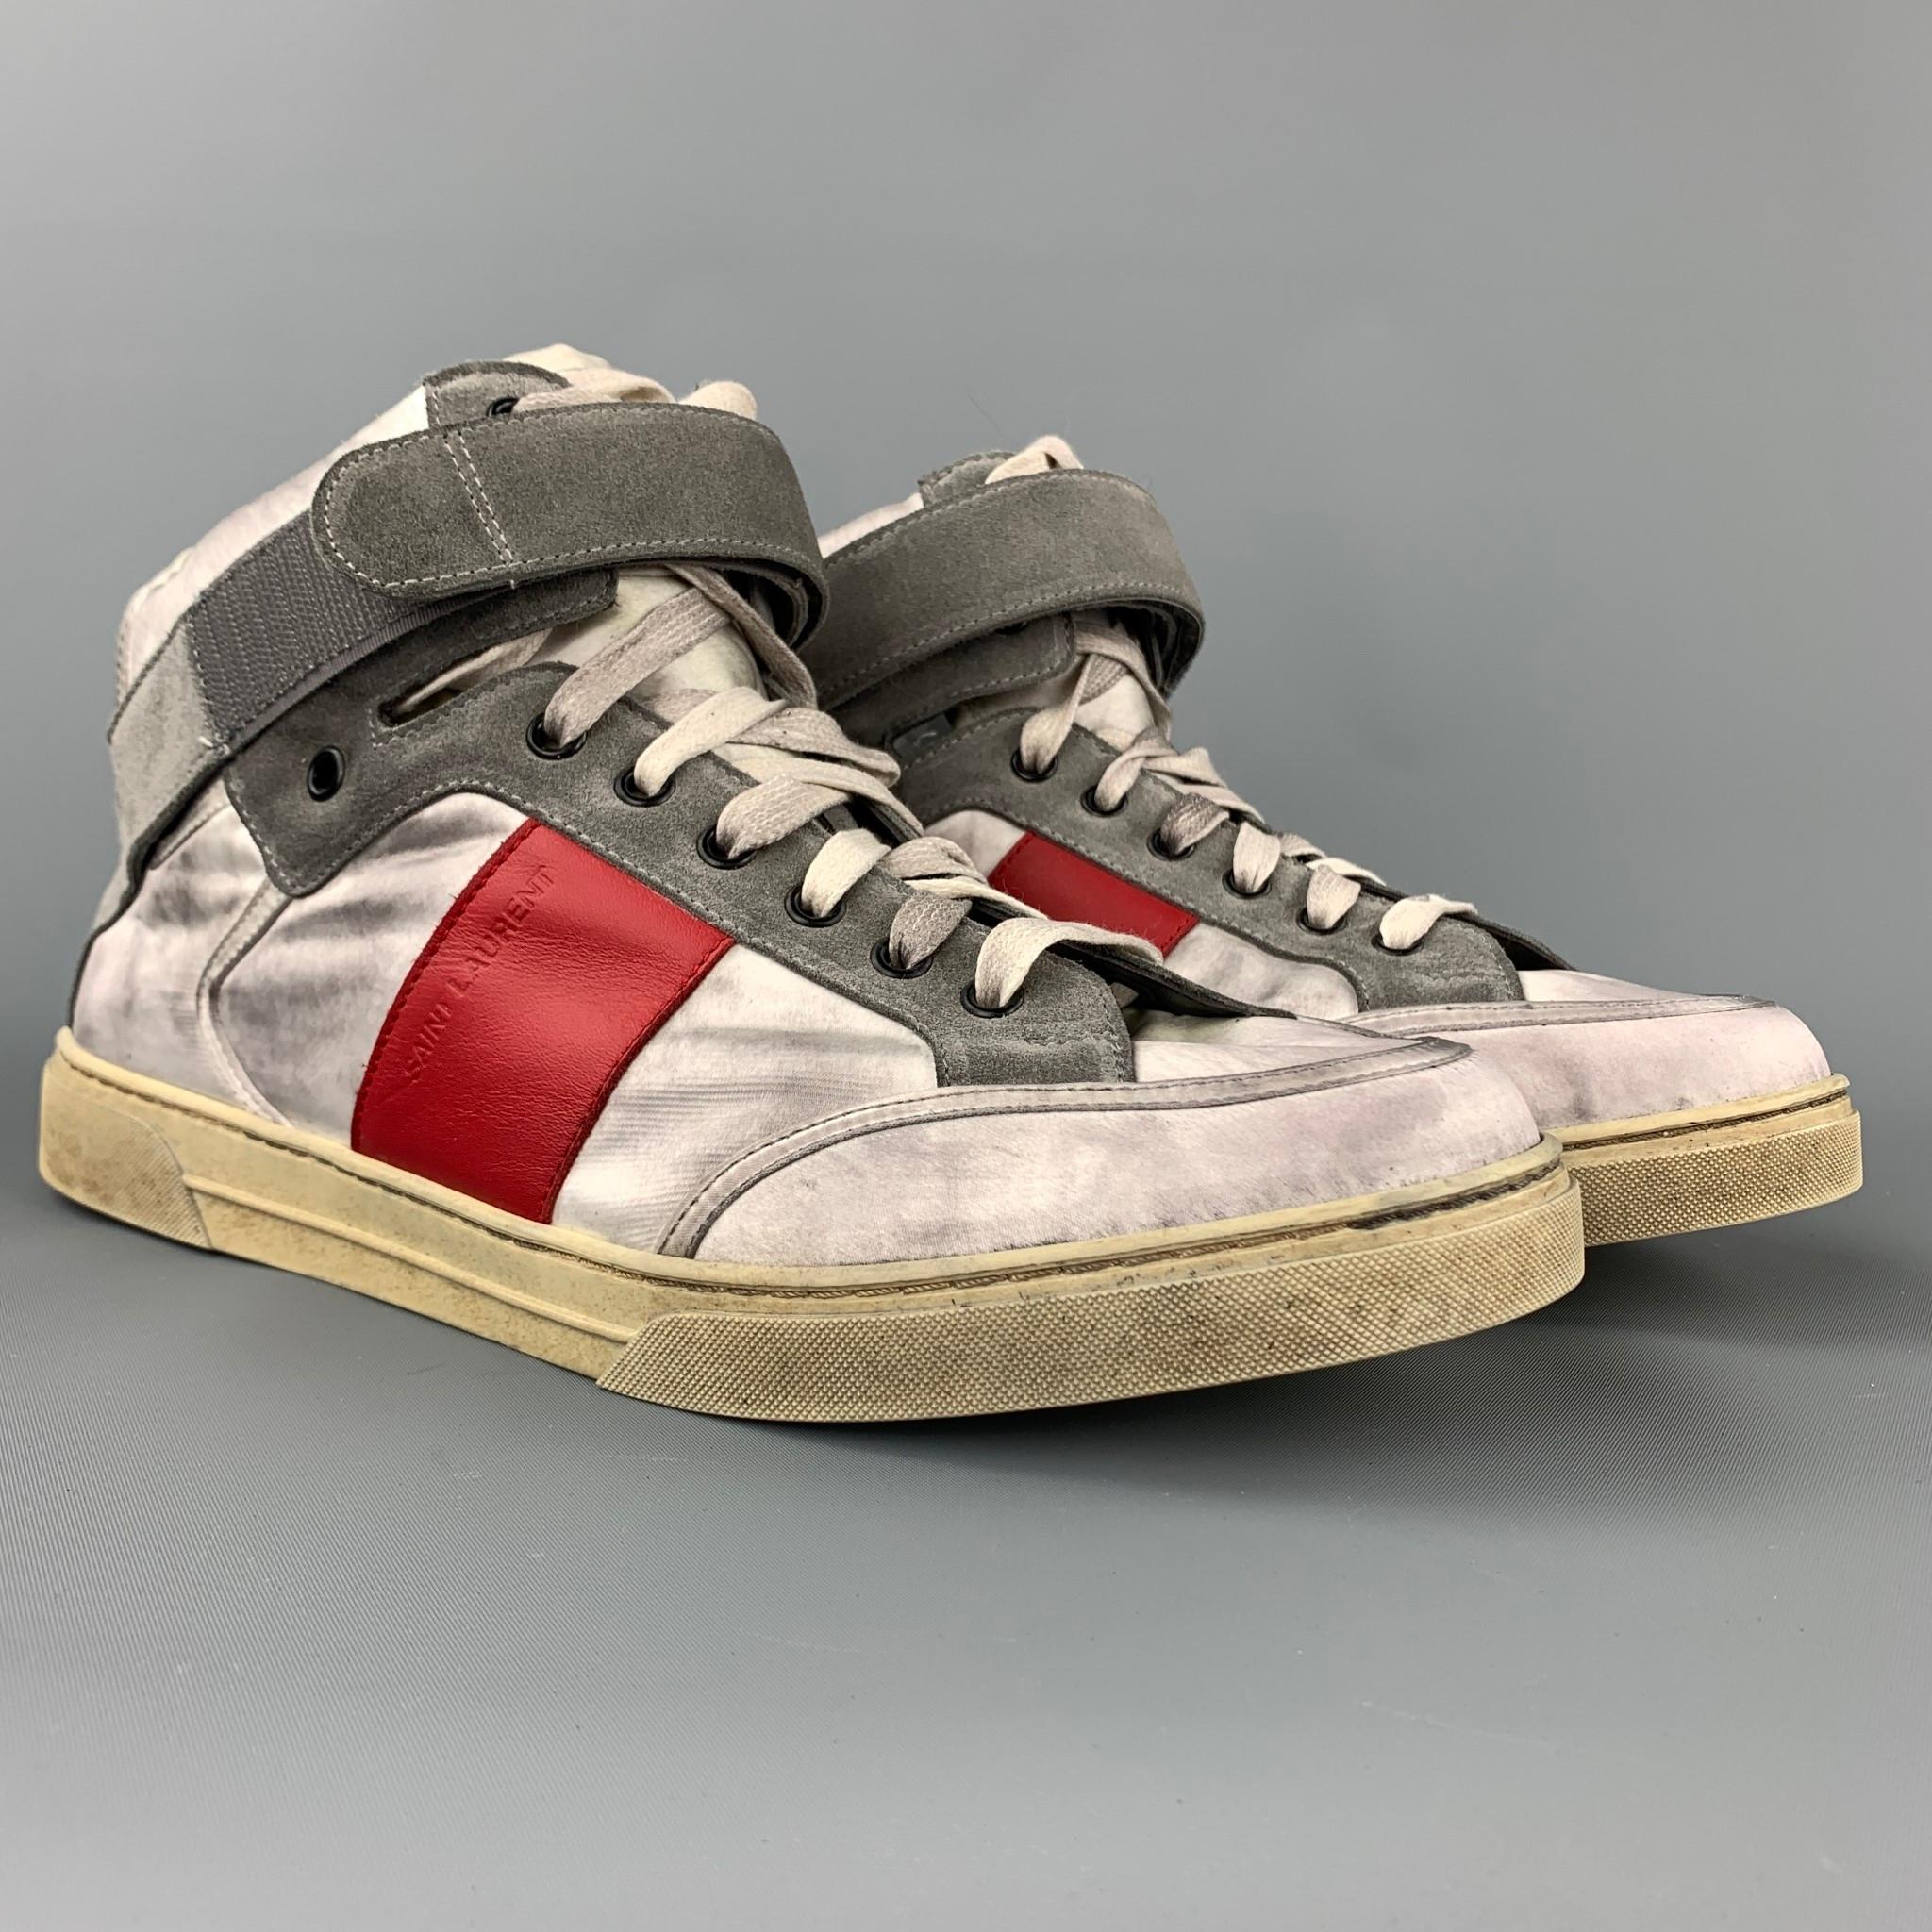 SAINT LAURENT sneakers comes in a silver distressed leather with a red trim featuring a high top style, hook and loop detail, rubber sole, and a lace up closure. Moderate wear. Made in Italy.

Good Pre-Owned Condition.
Marked: M 533635